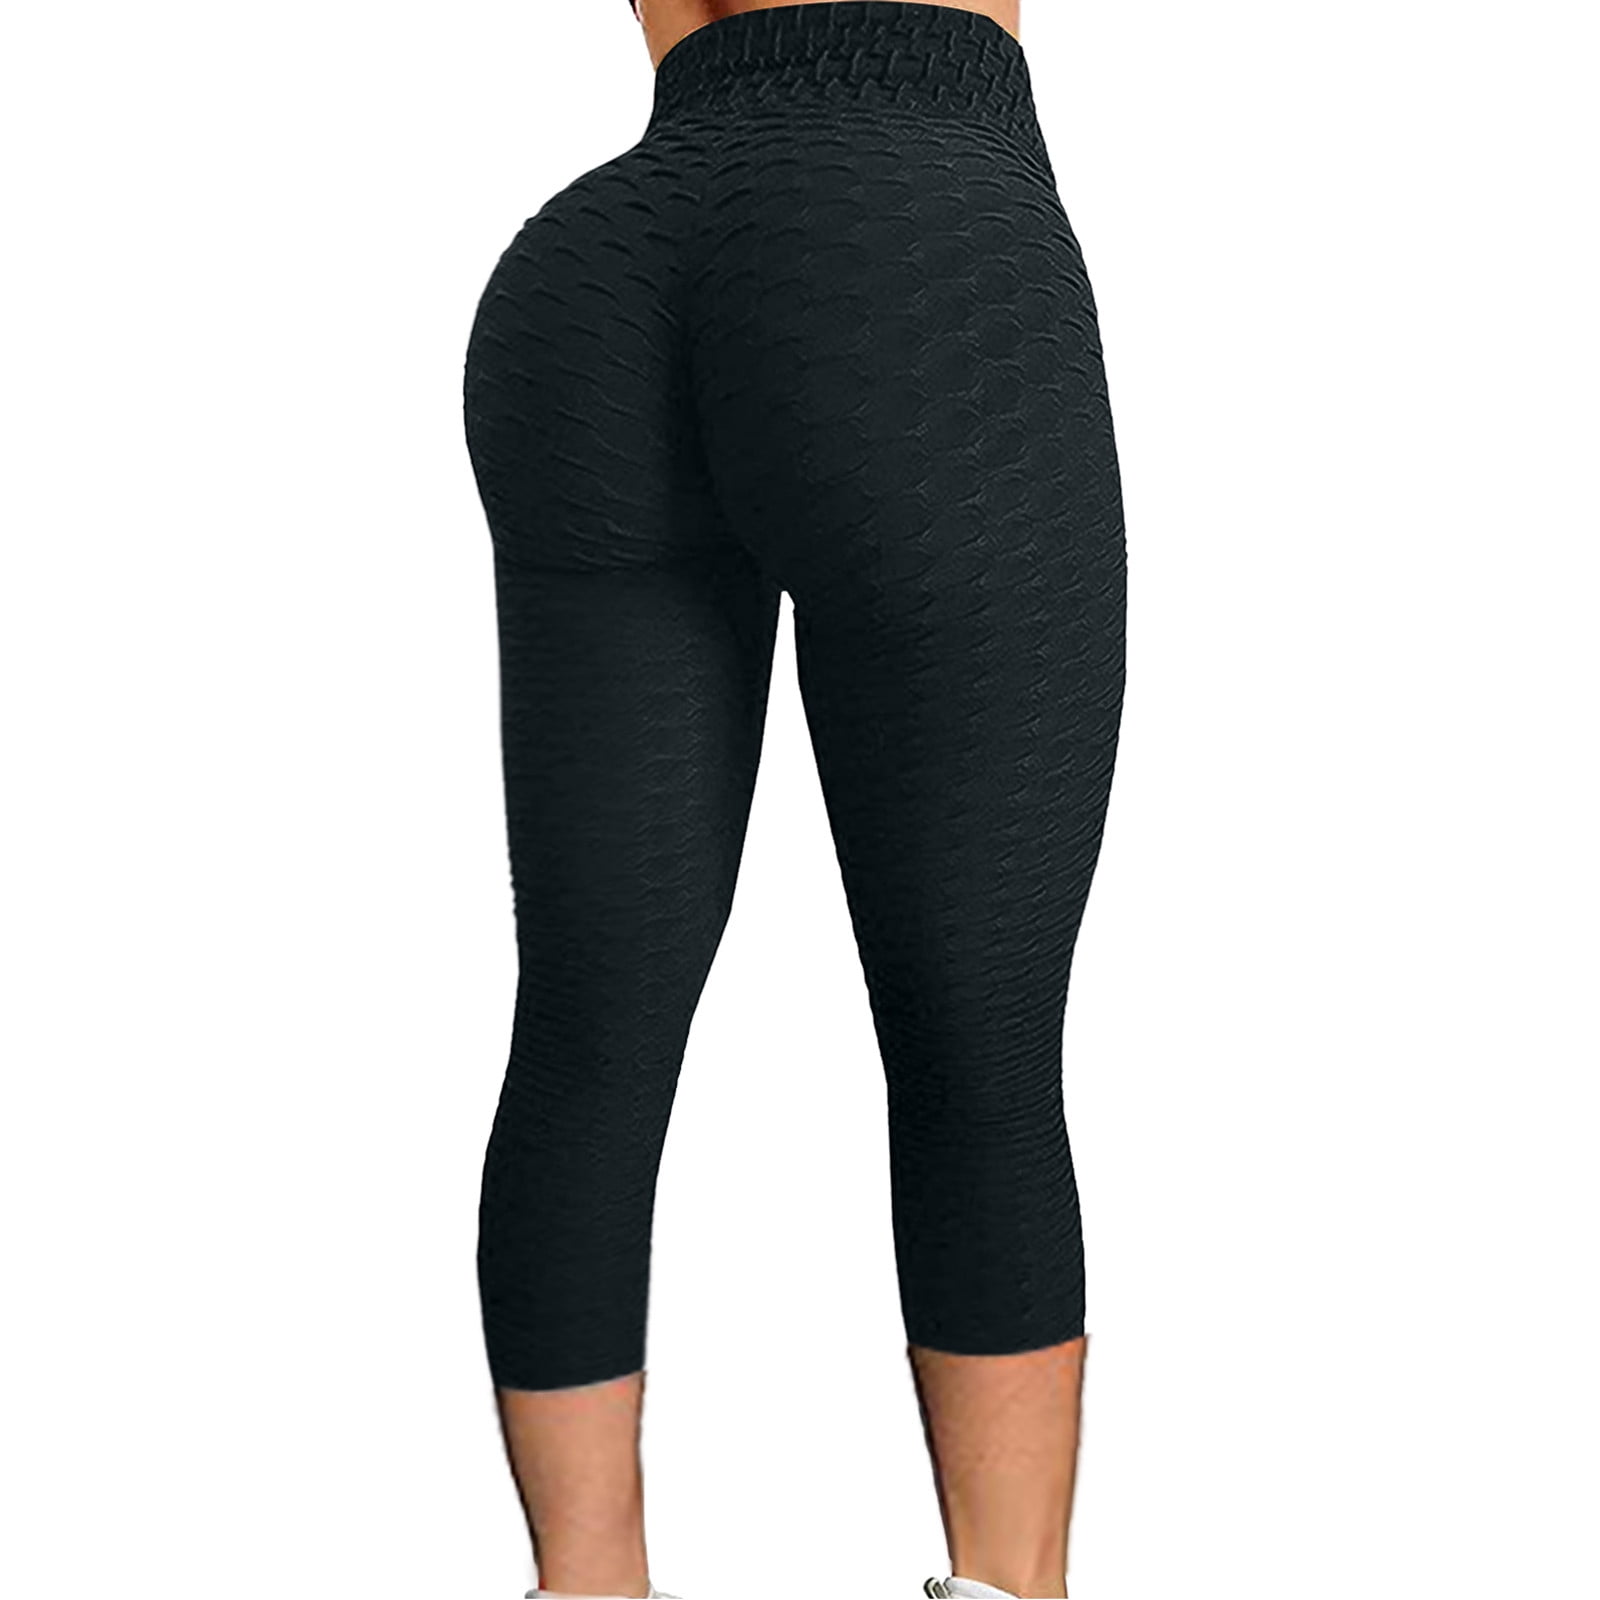 Aayomet Yoga Pants With Pockets for Women Women No Front Seam Leggings  Ruched High Waist Yoga Pants,Gray L 